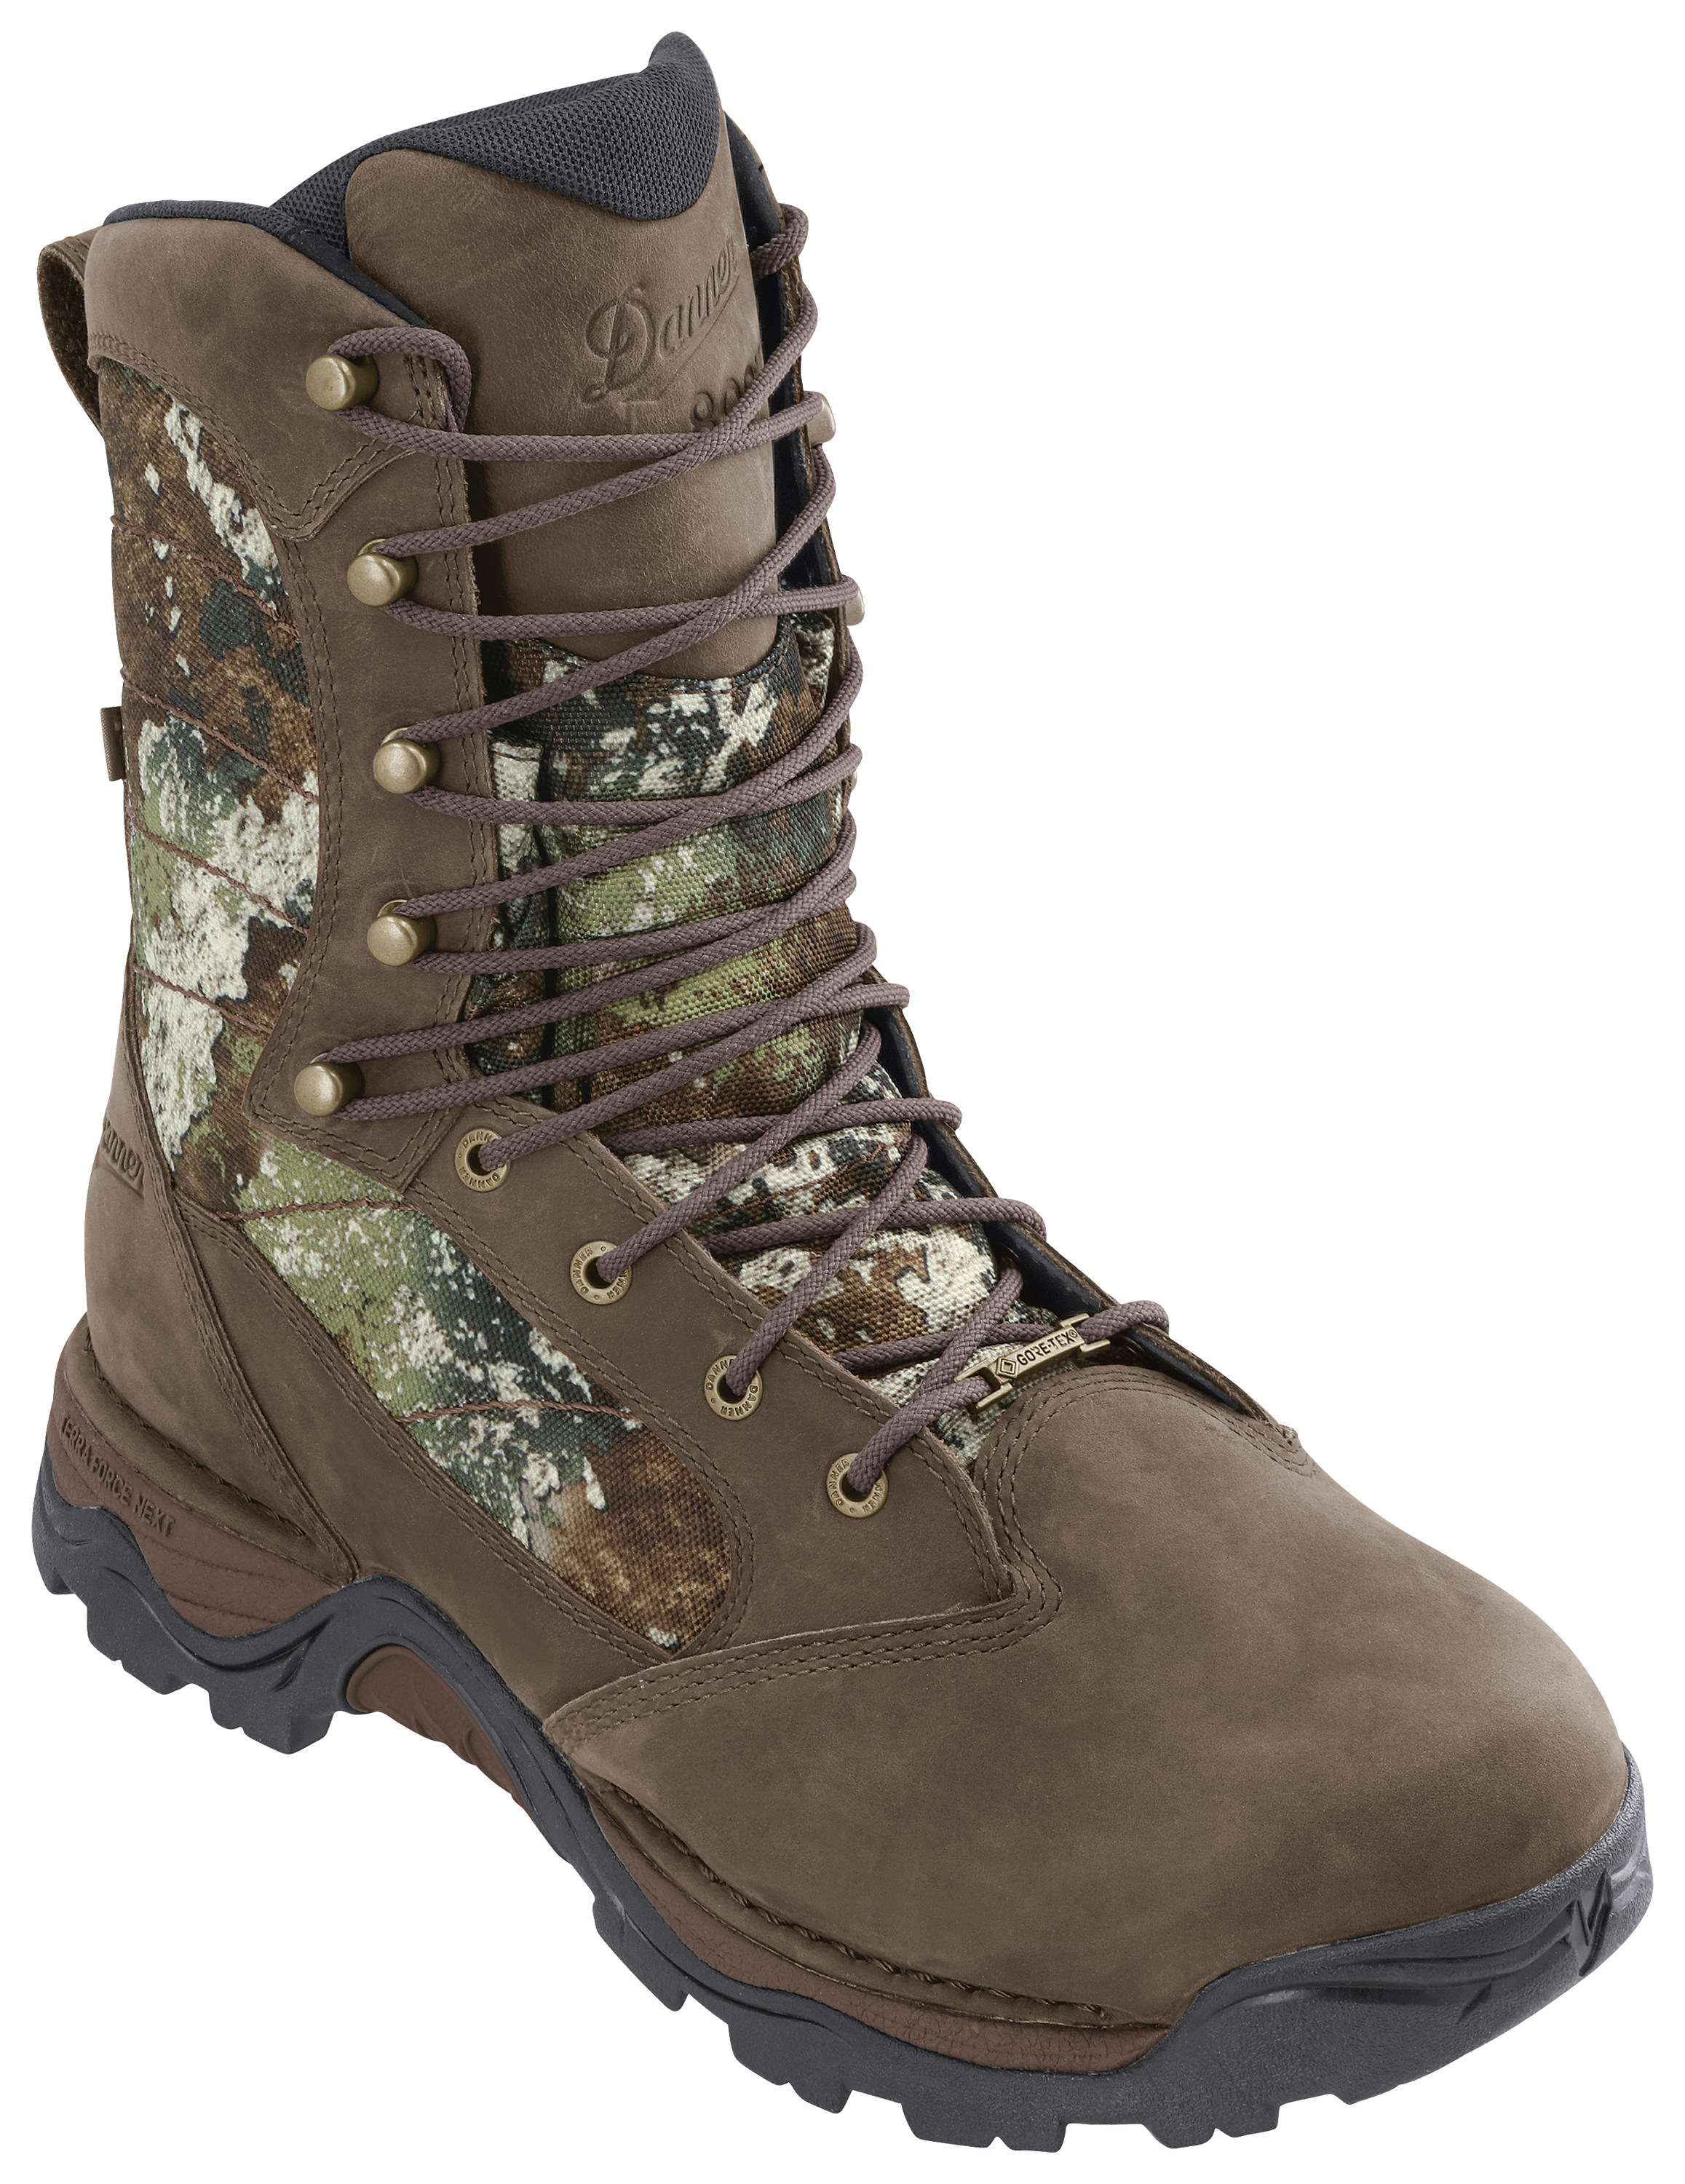 Danner Pronghorn 800 TrueTimber Strata Insulated GORE-TEX Hunting Boots for Men - 9M